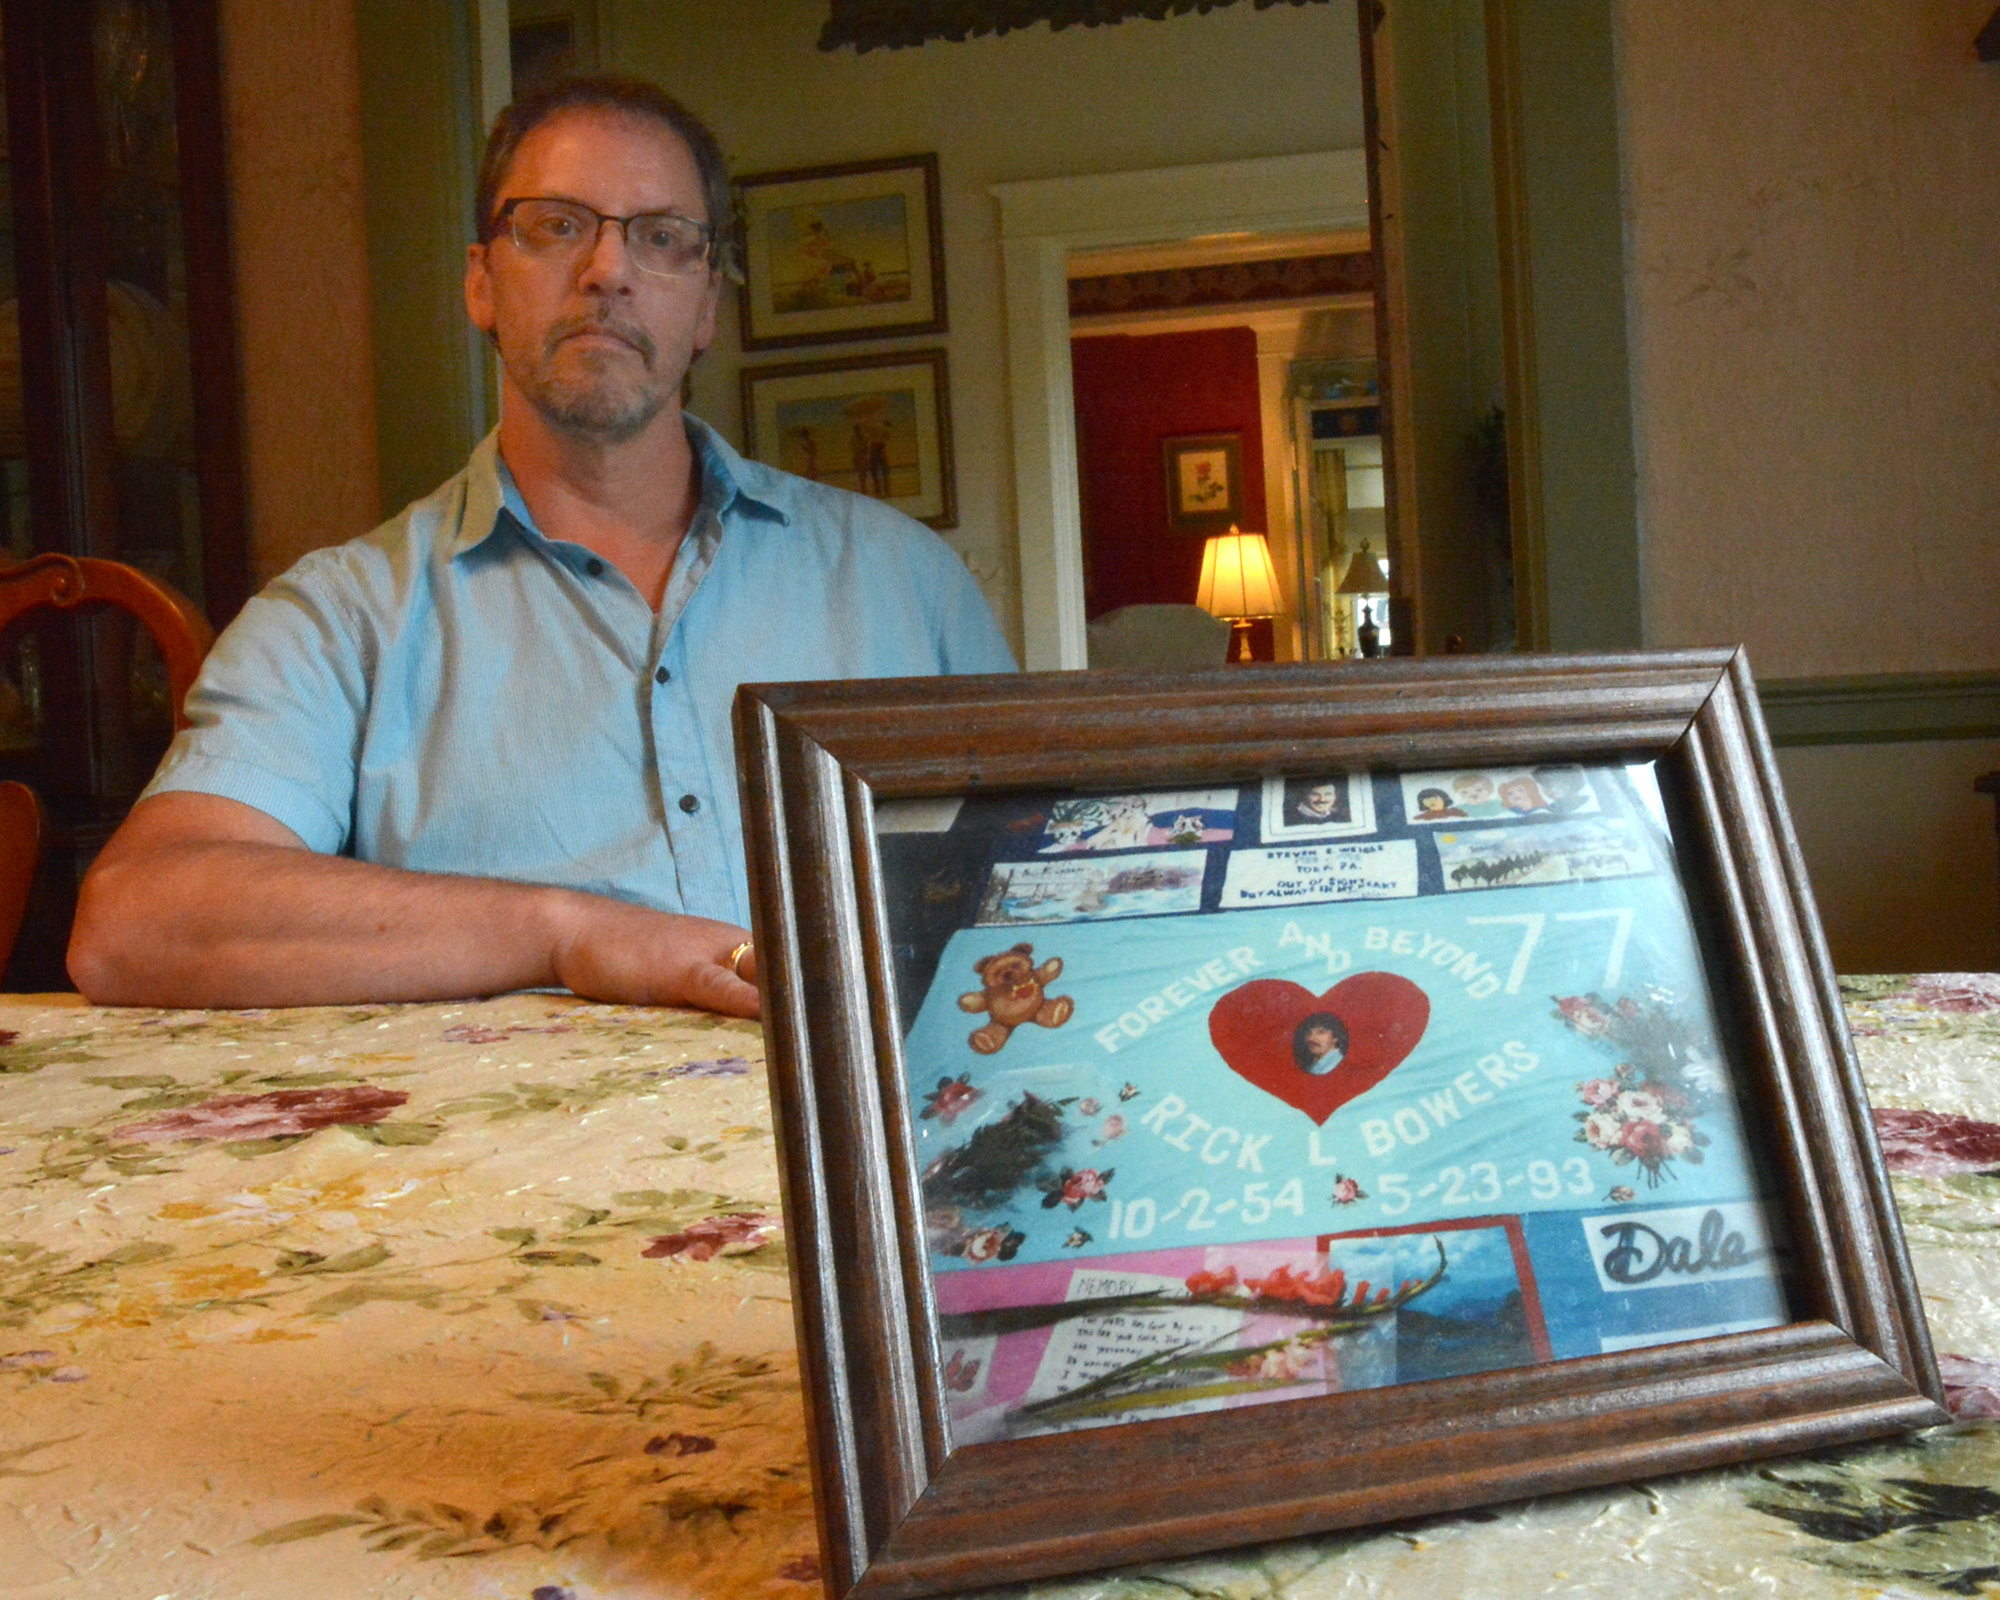 Scott Smith with picture of Aids quilt